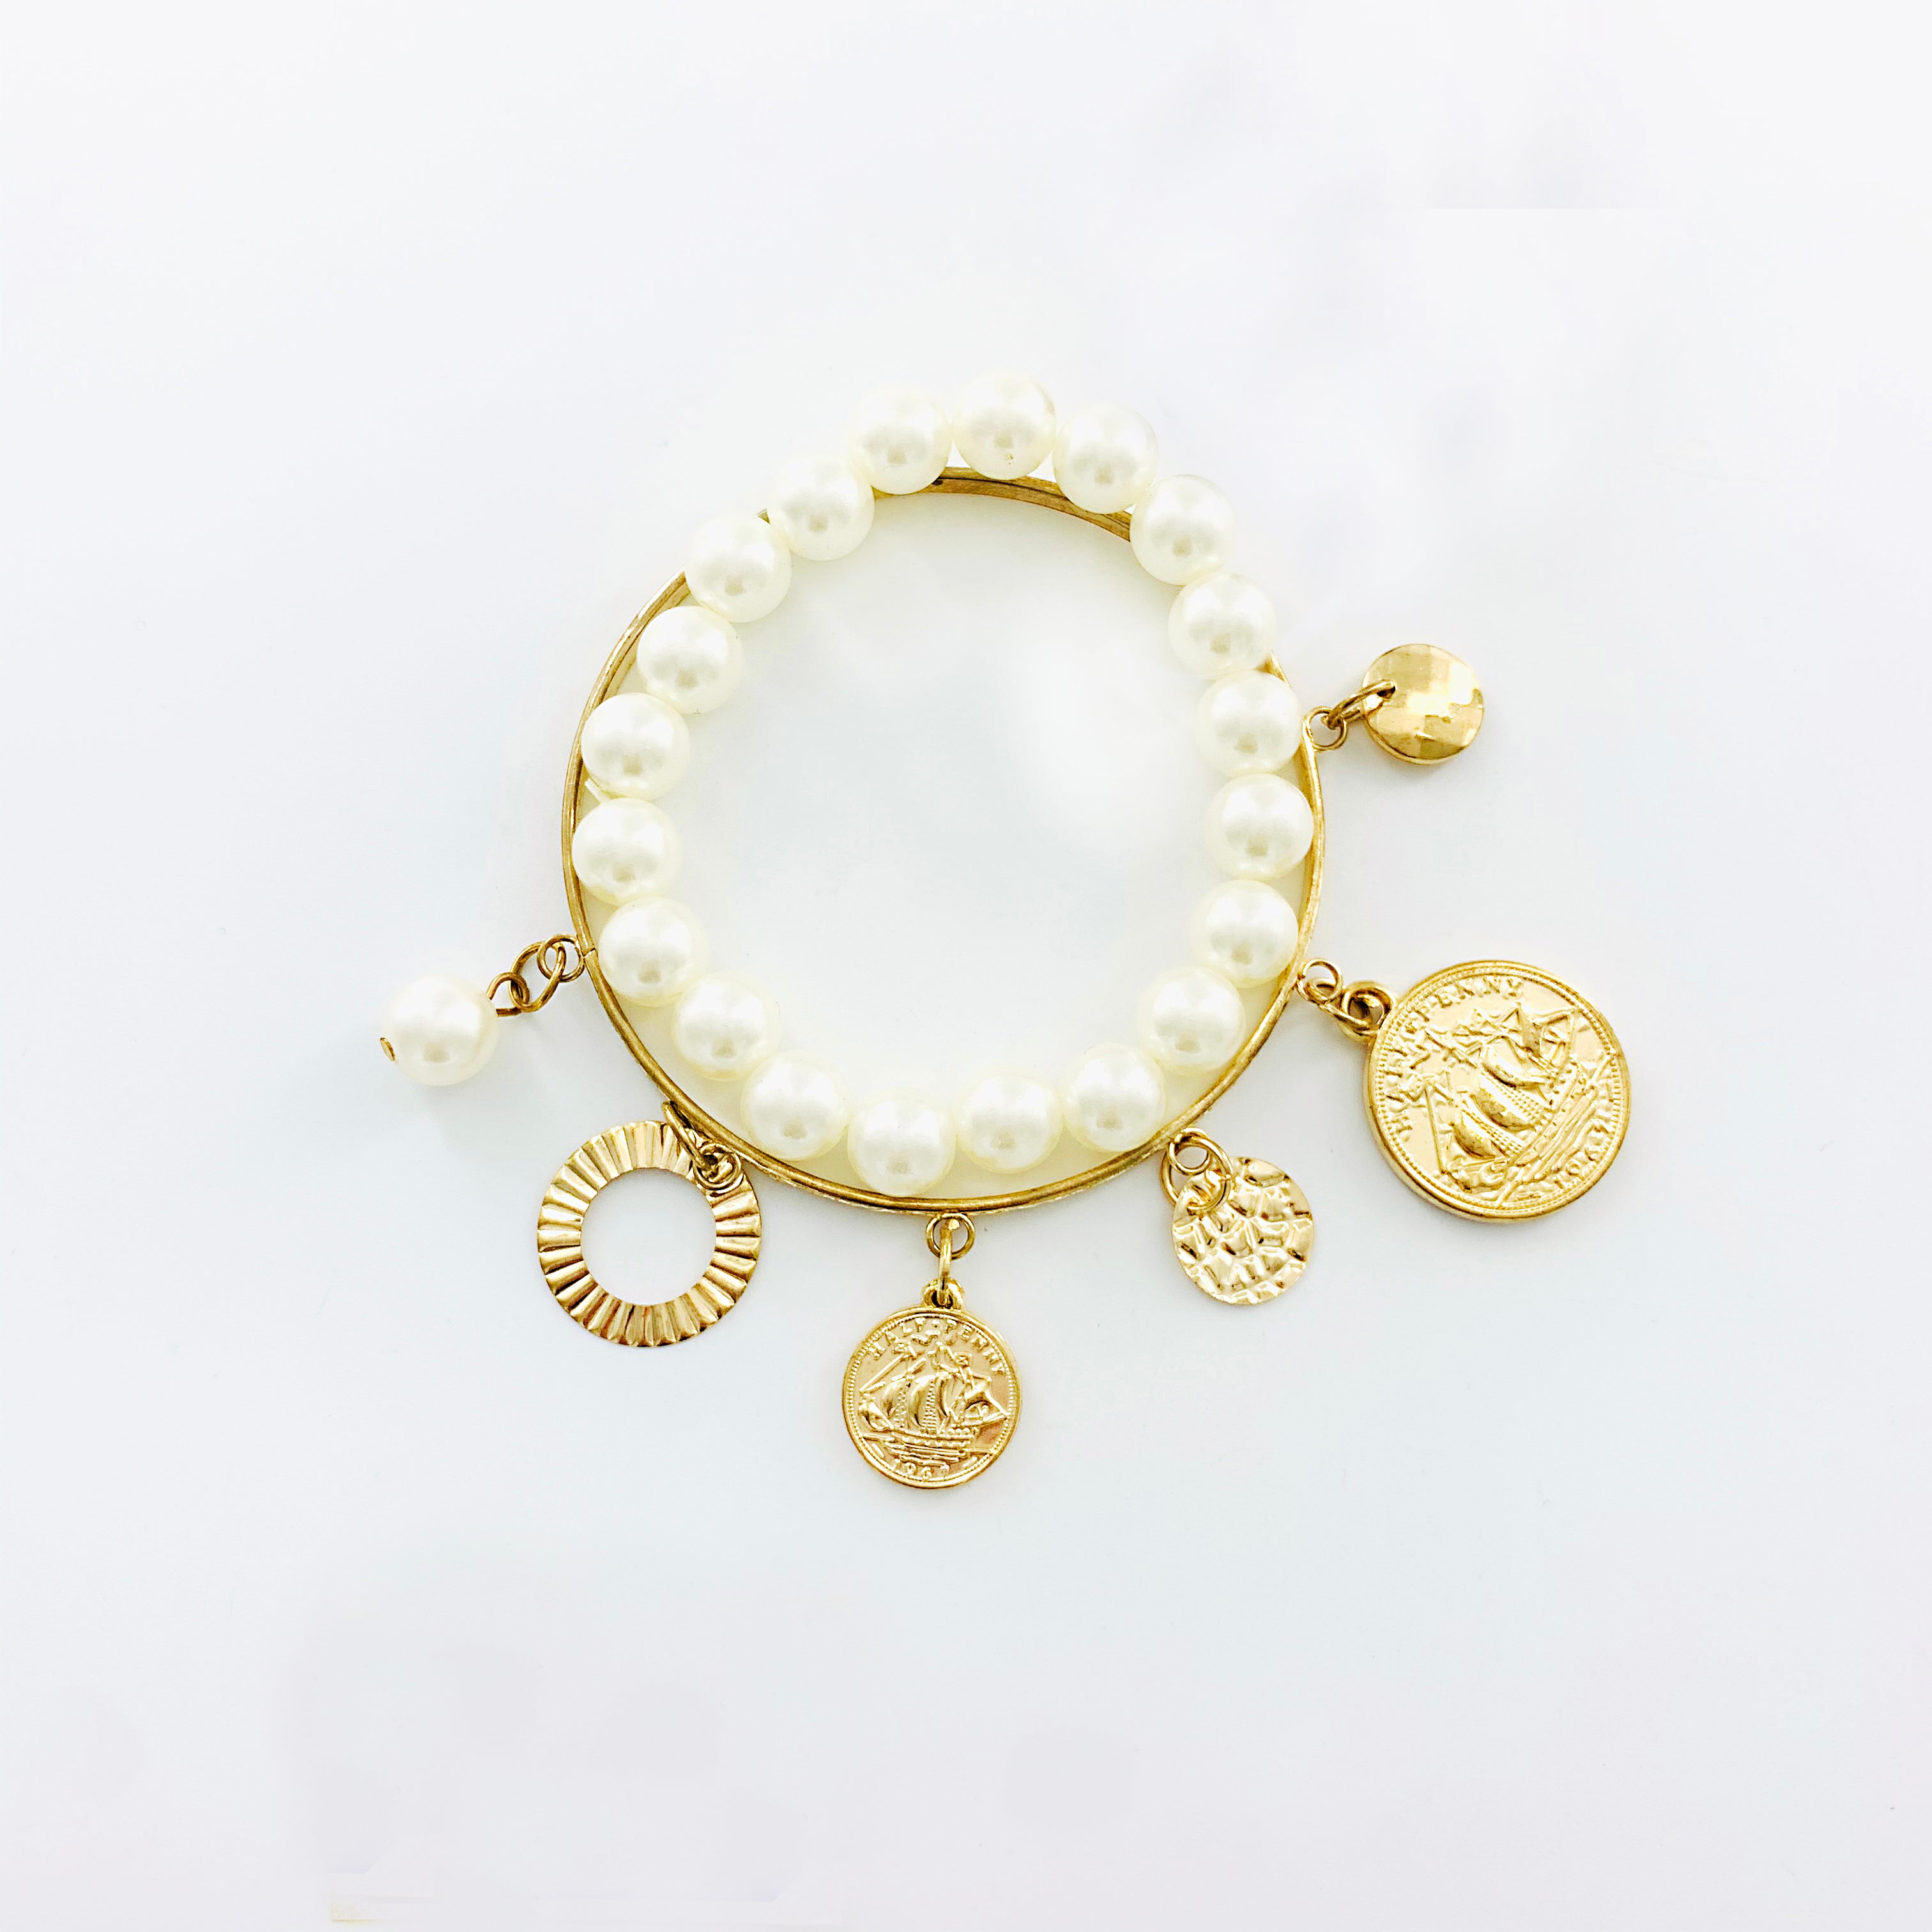 Pearl and gold bangle with gold coin charms - gold